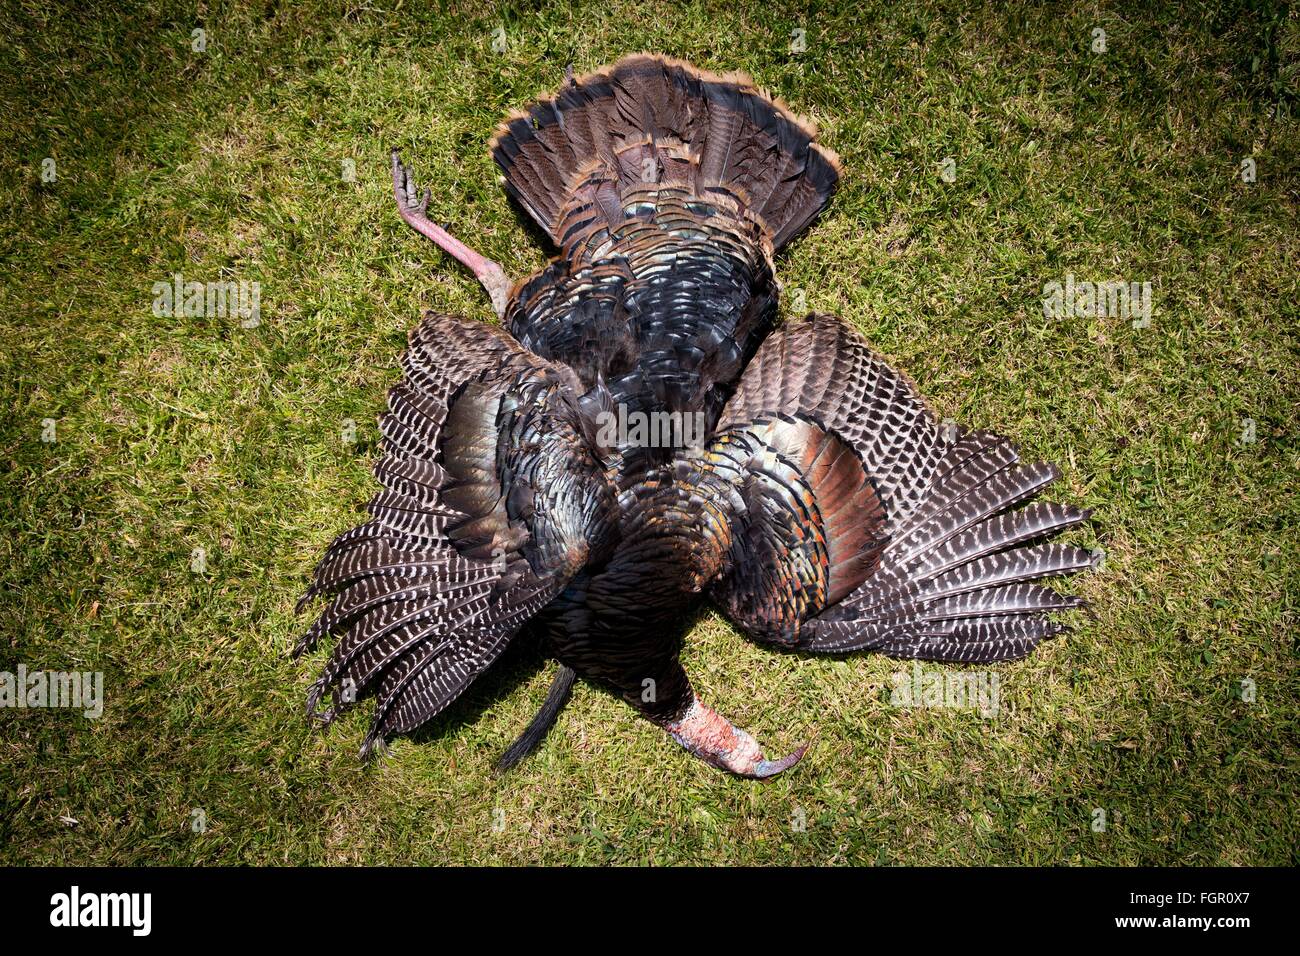 Successful hunt: Wild turkey spread out on the ground, in May 2015. Stock Photo